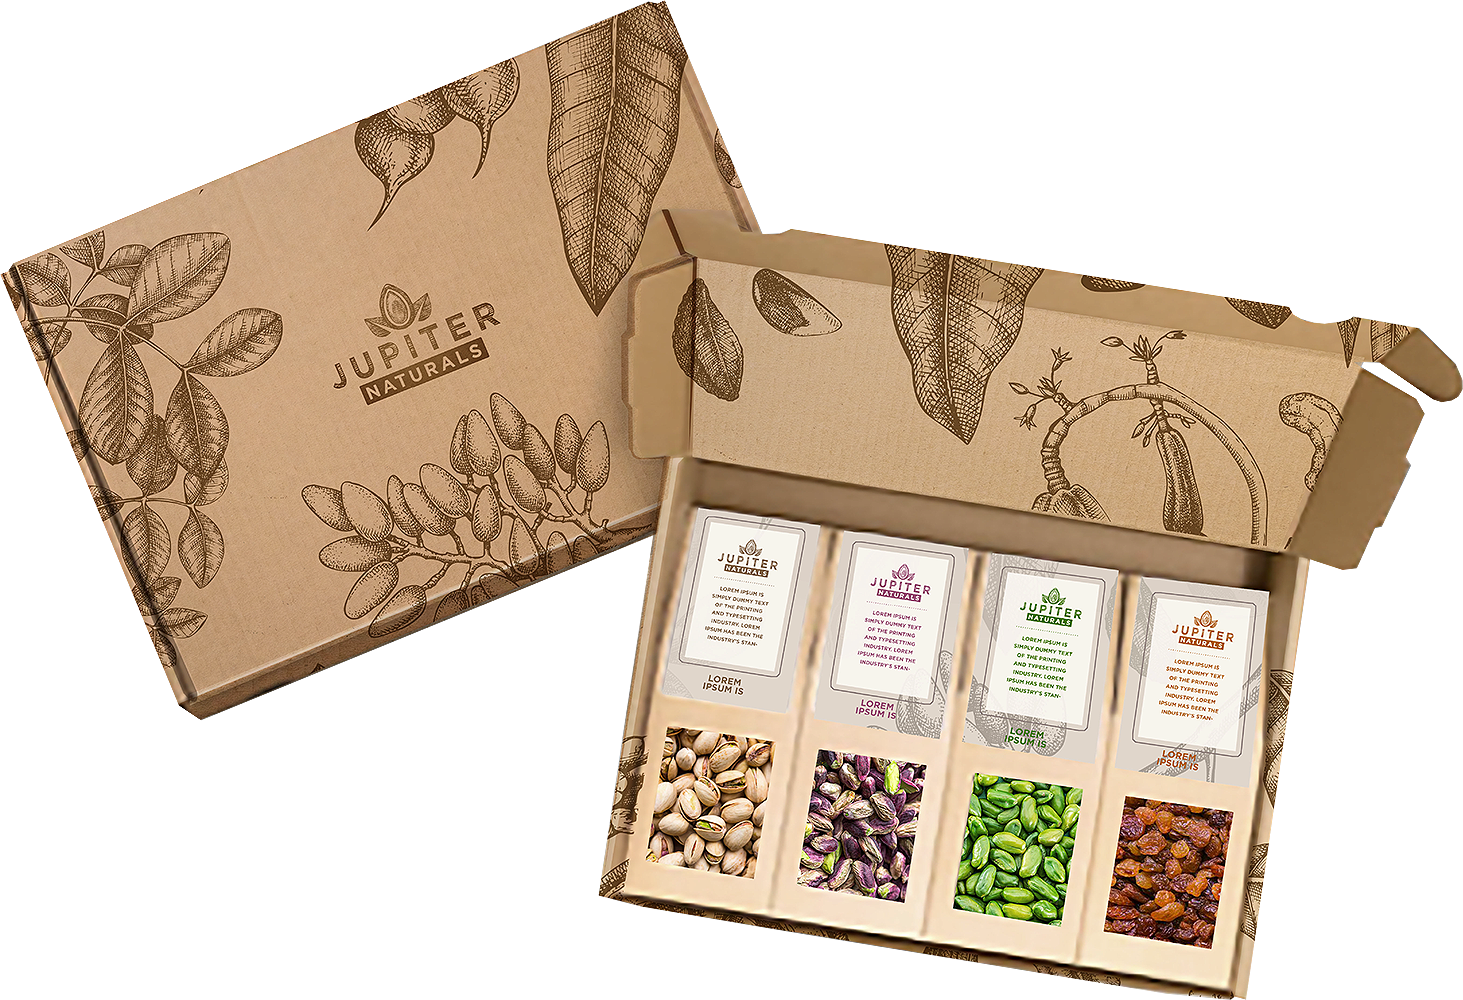 Premium pistachios, nuts and dried fruits